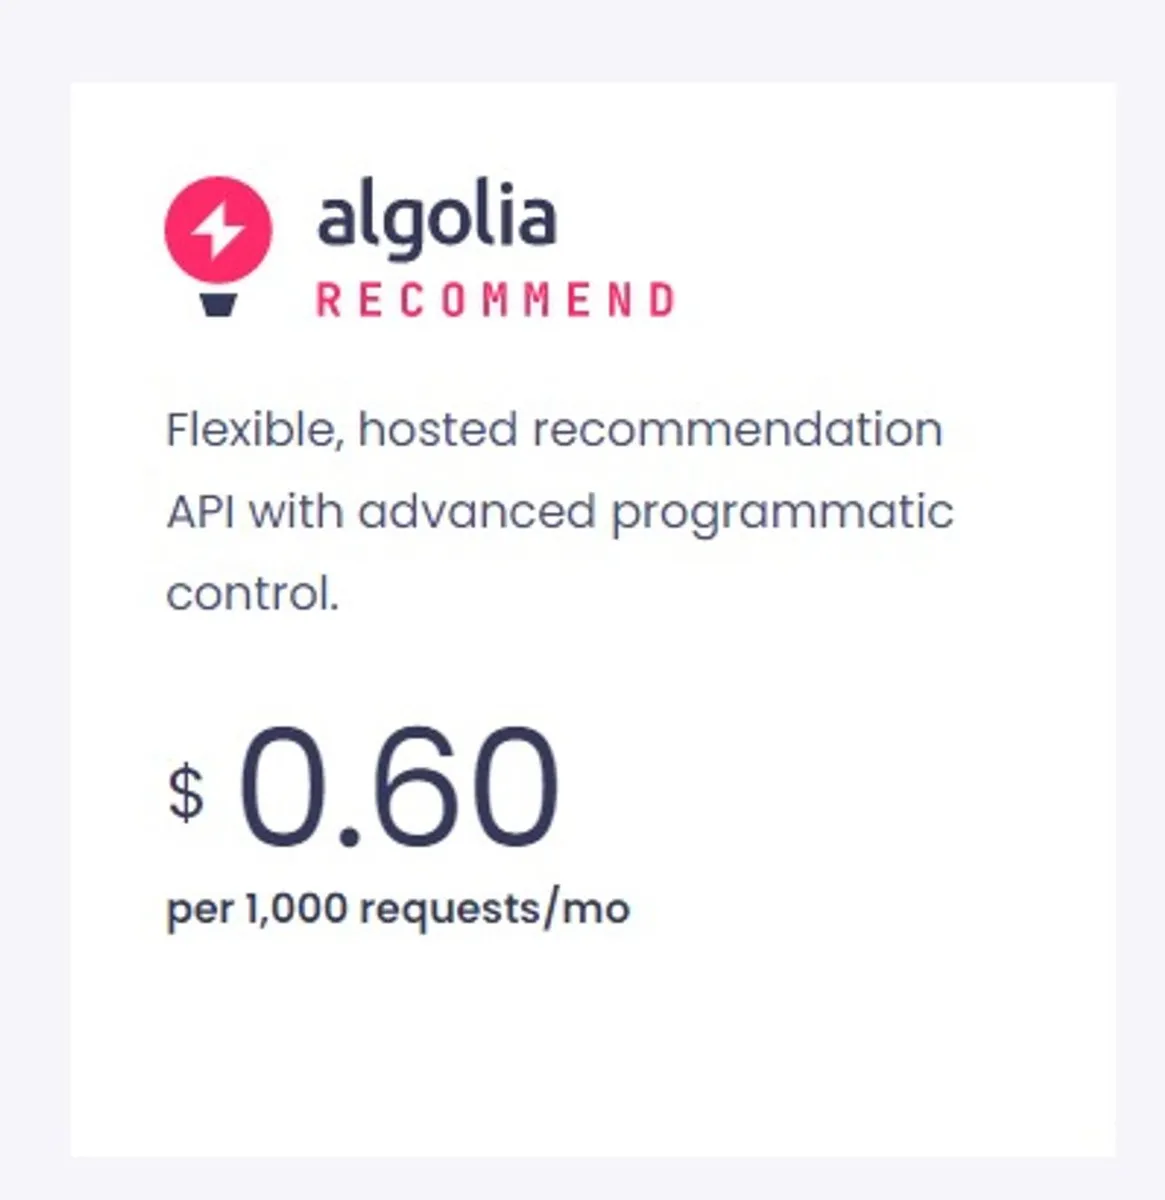 Algolia Recommend Pricing Plan